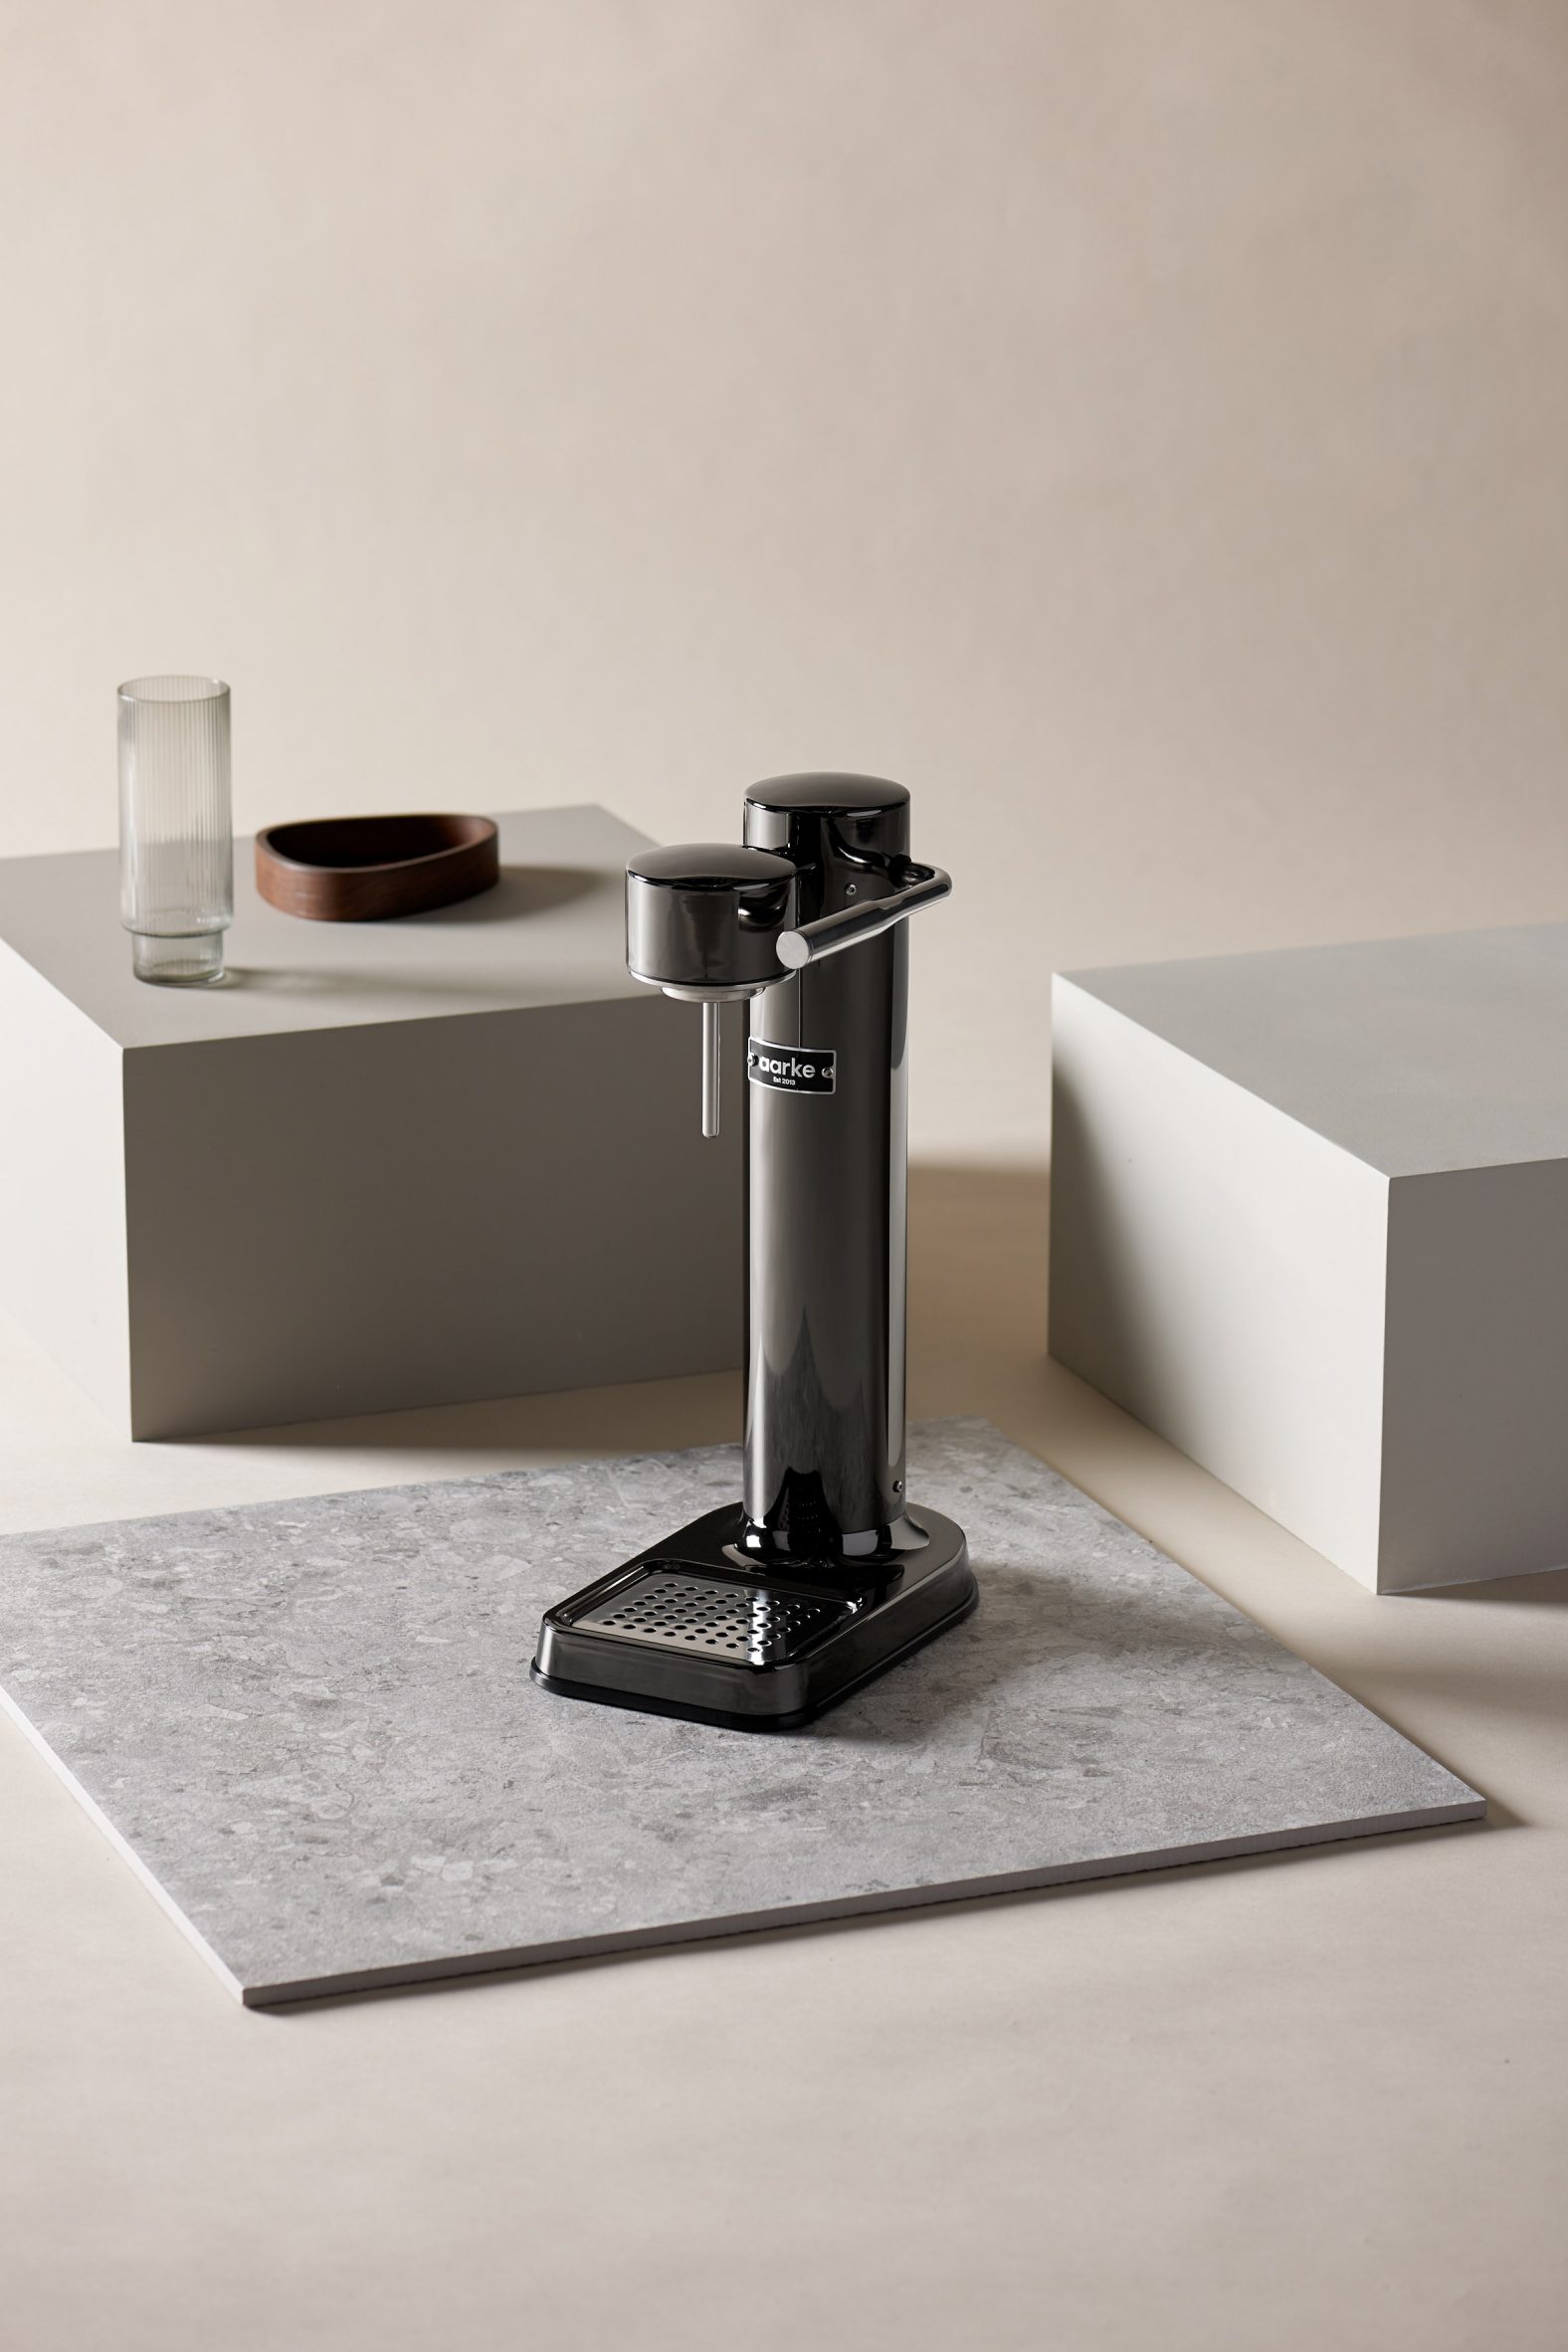 Aarke's Carbonator 3 is a minimalist soda maker for the home